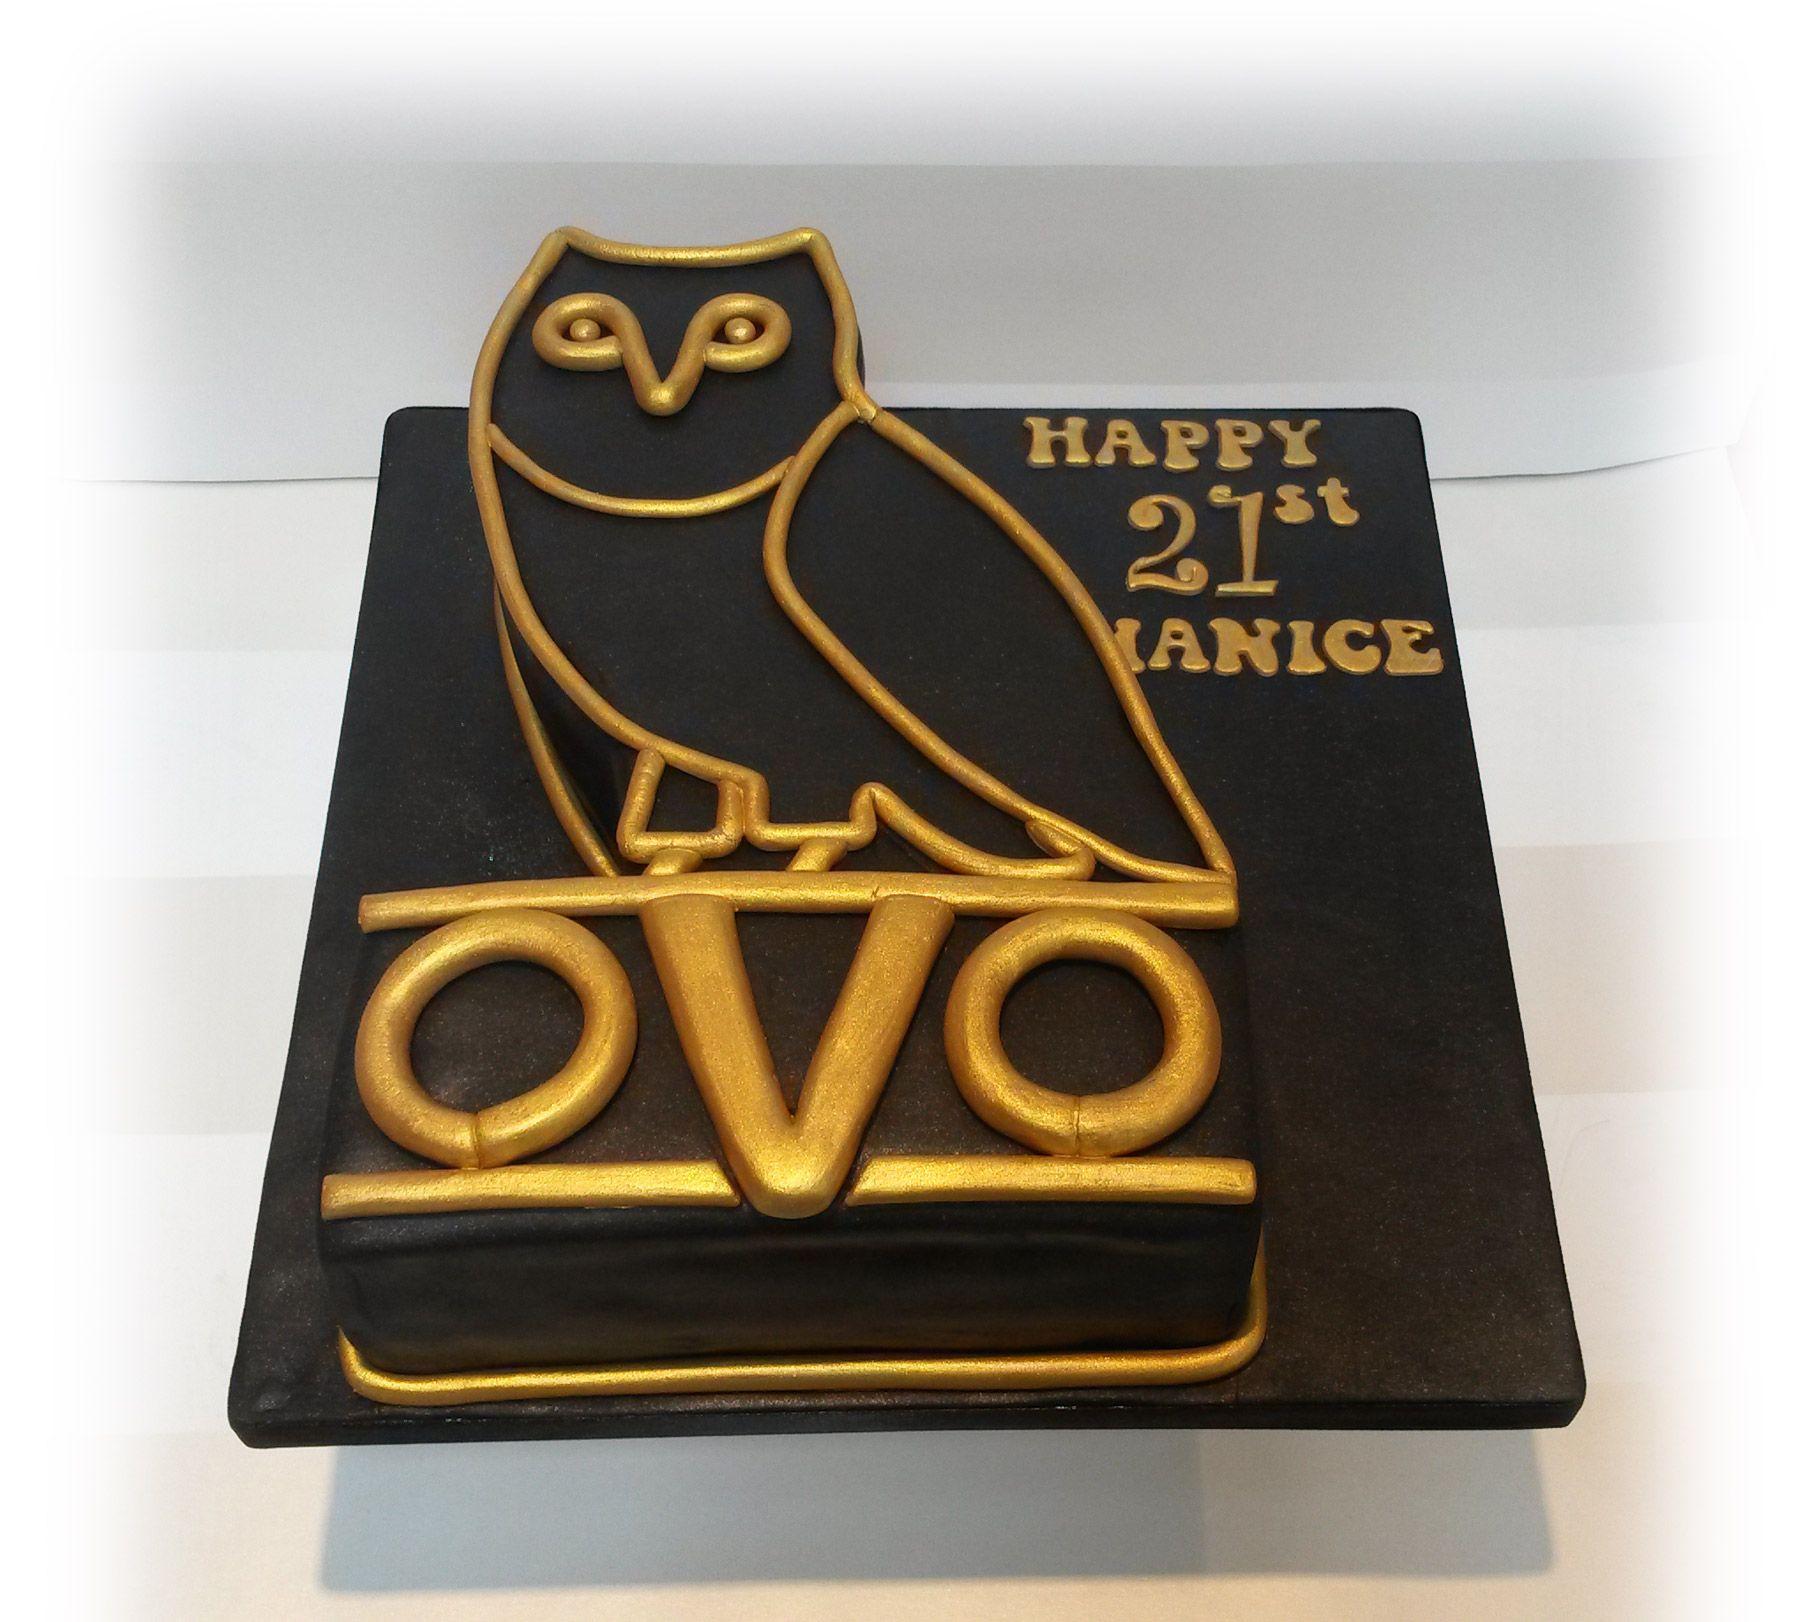 October's Very Own Logo - Drake themed cake with Owl logo 'October's Very Own' - Bakealous